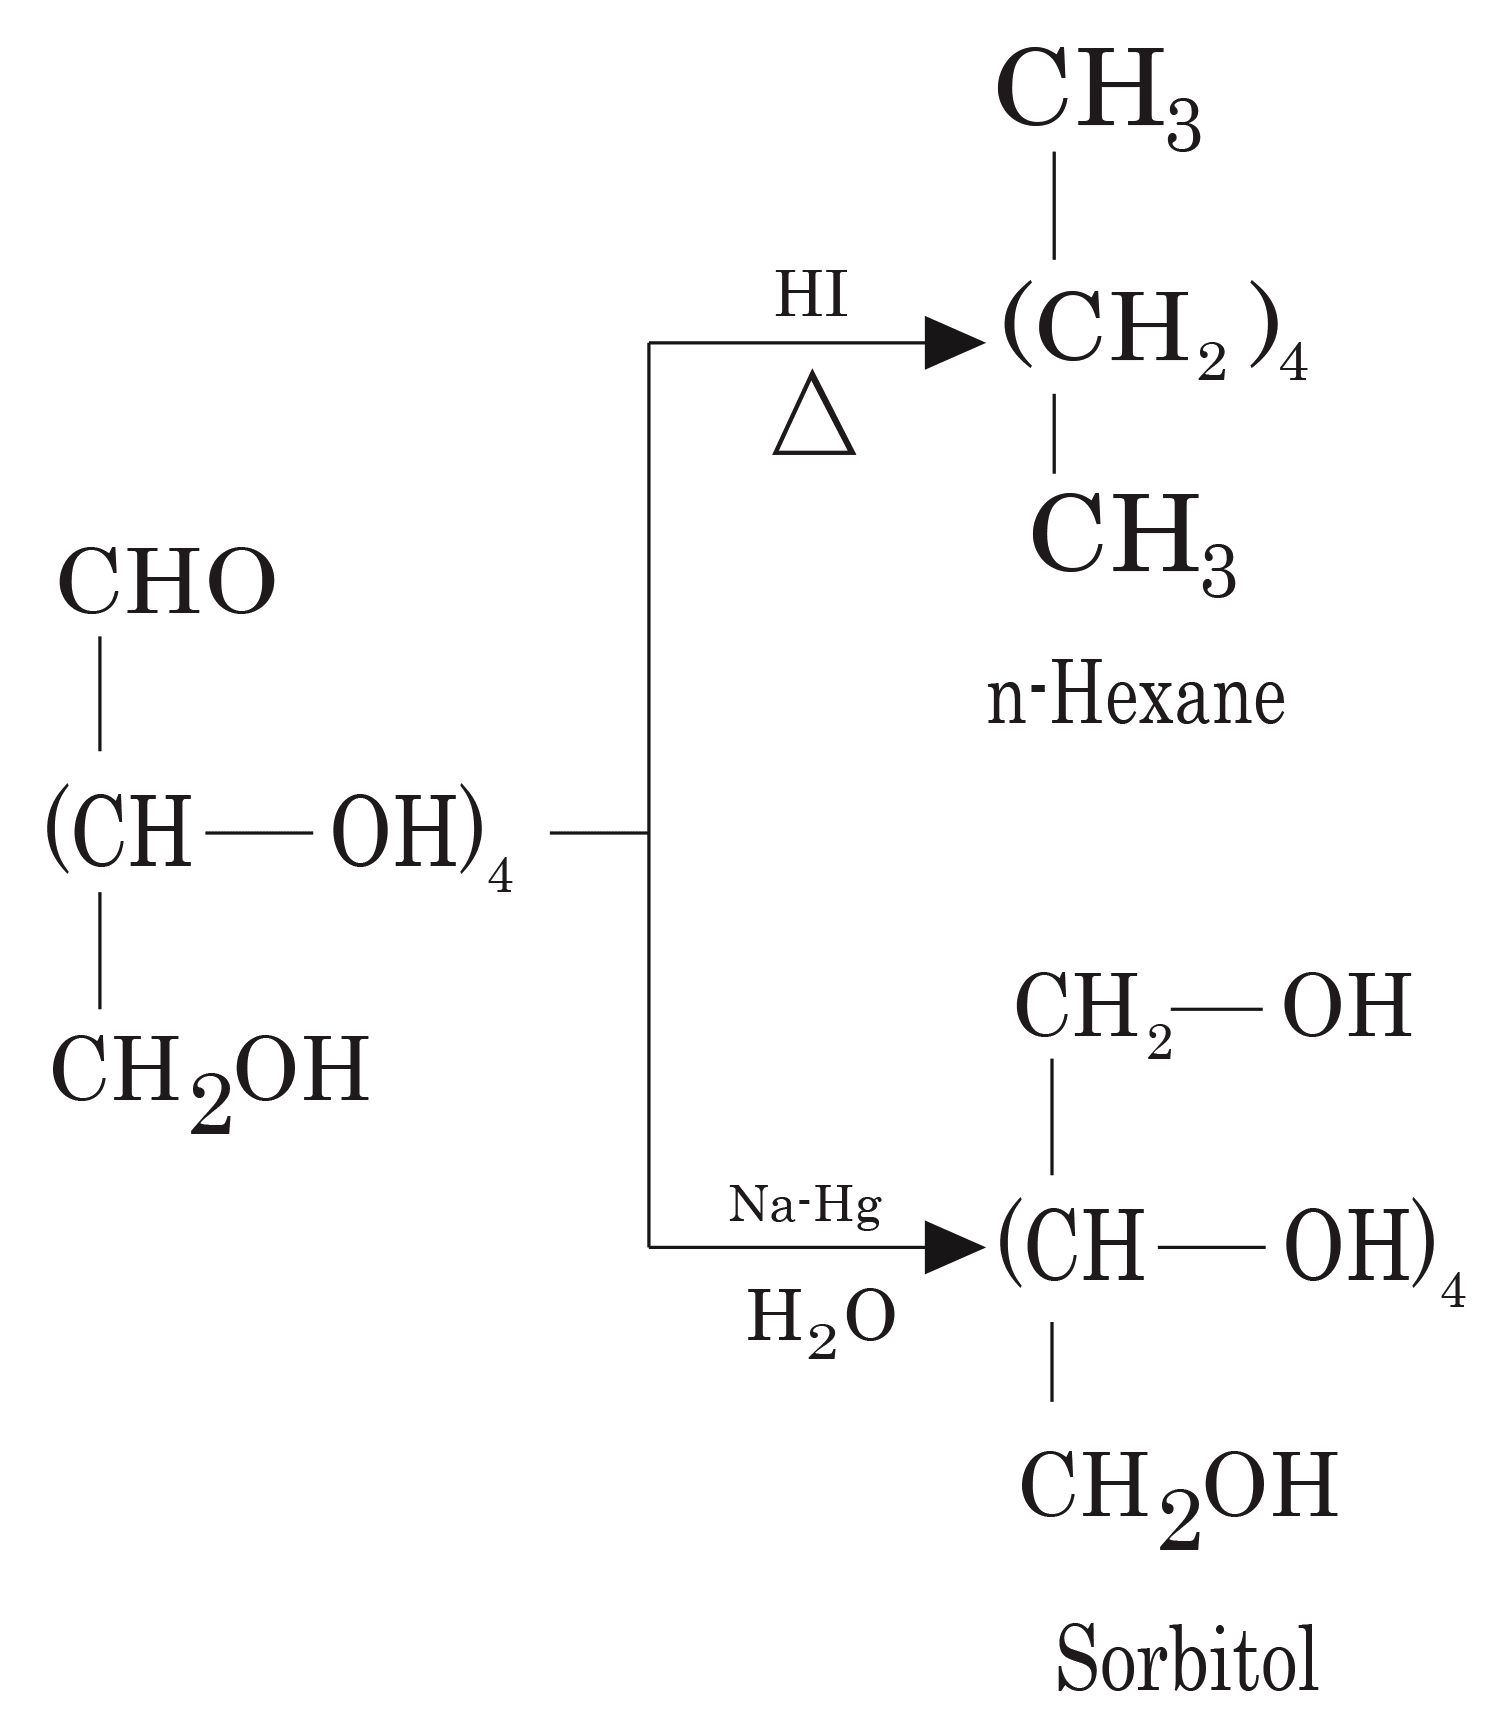 Reduction Reactions of Glucose